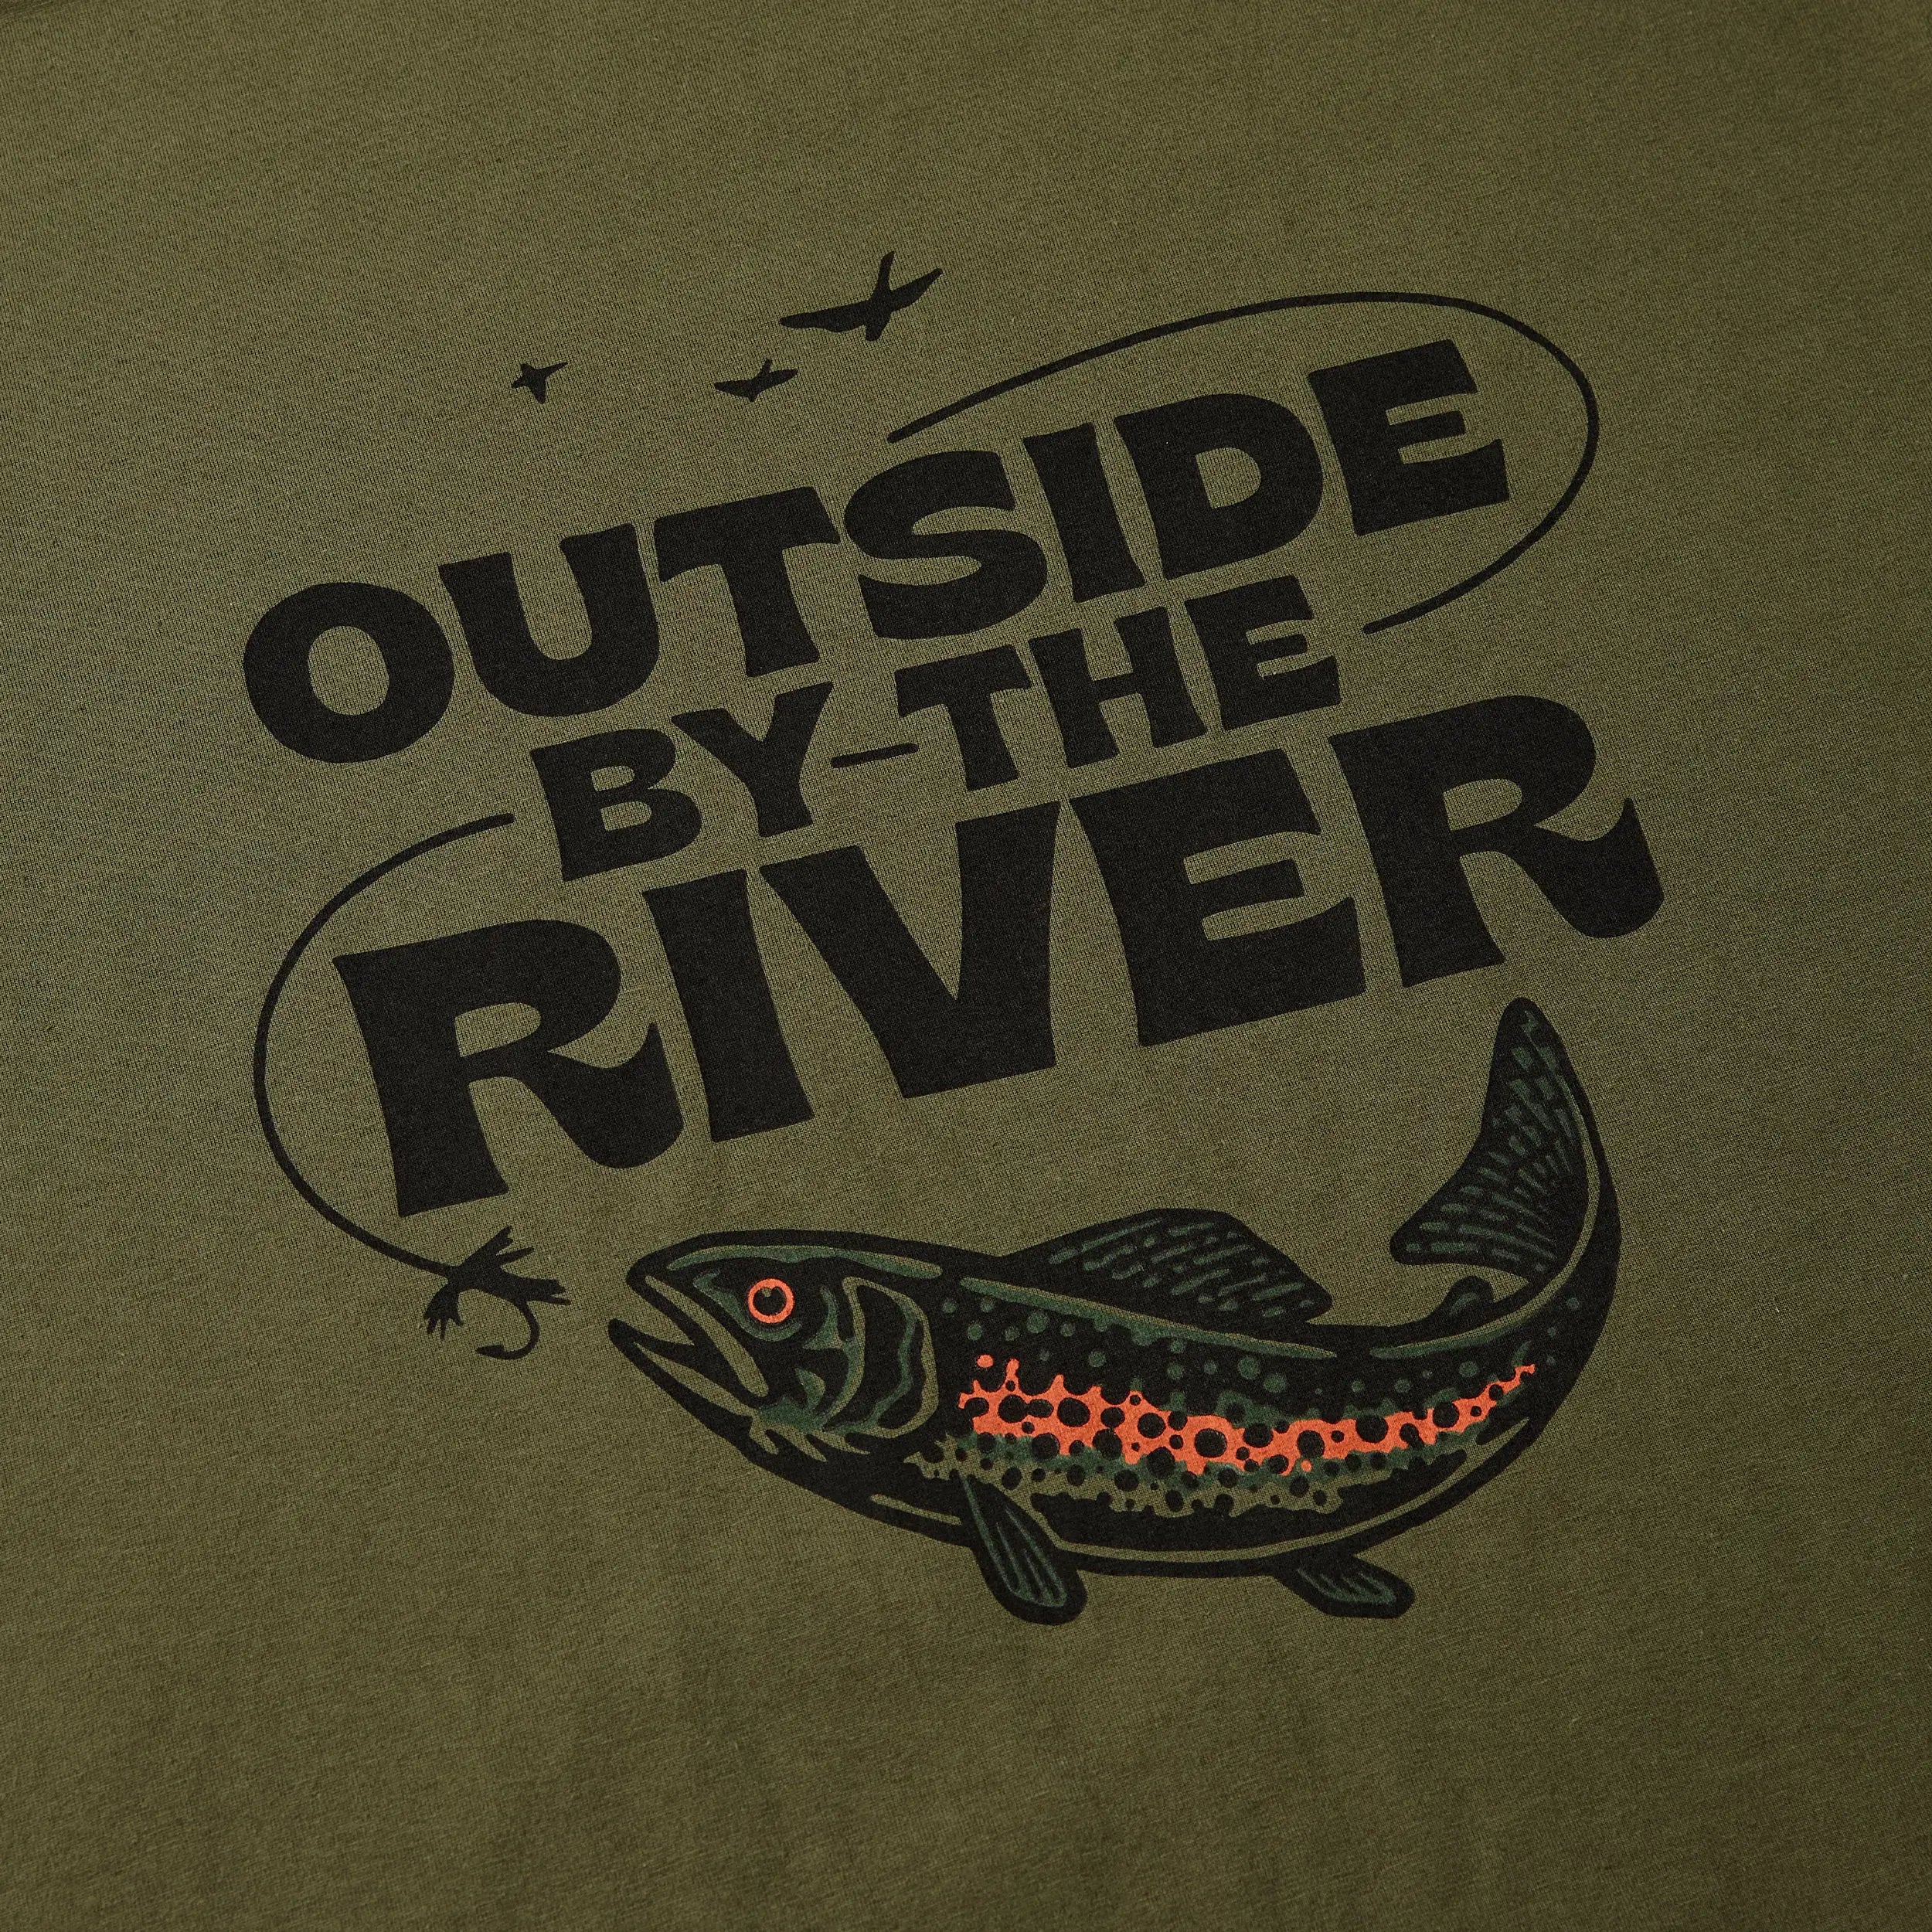 M's Outside By The River T-Shirt